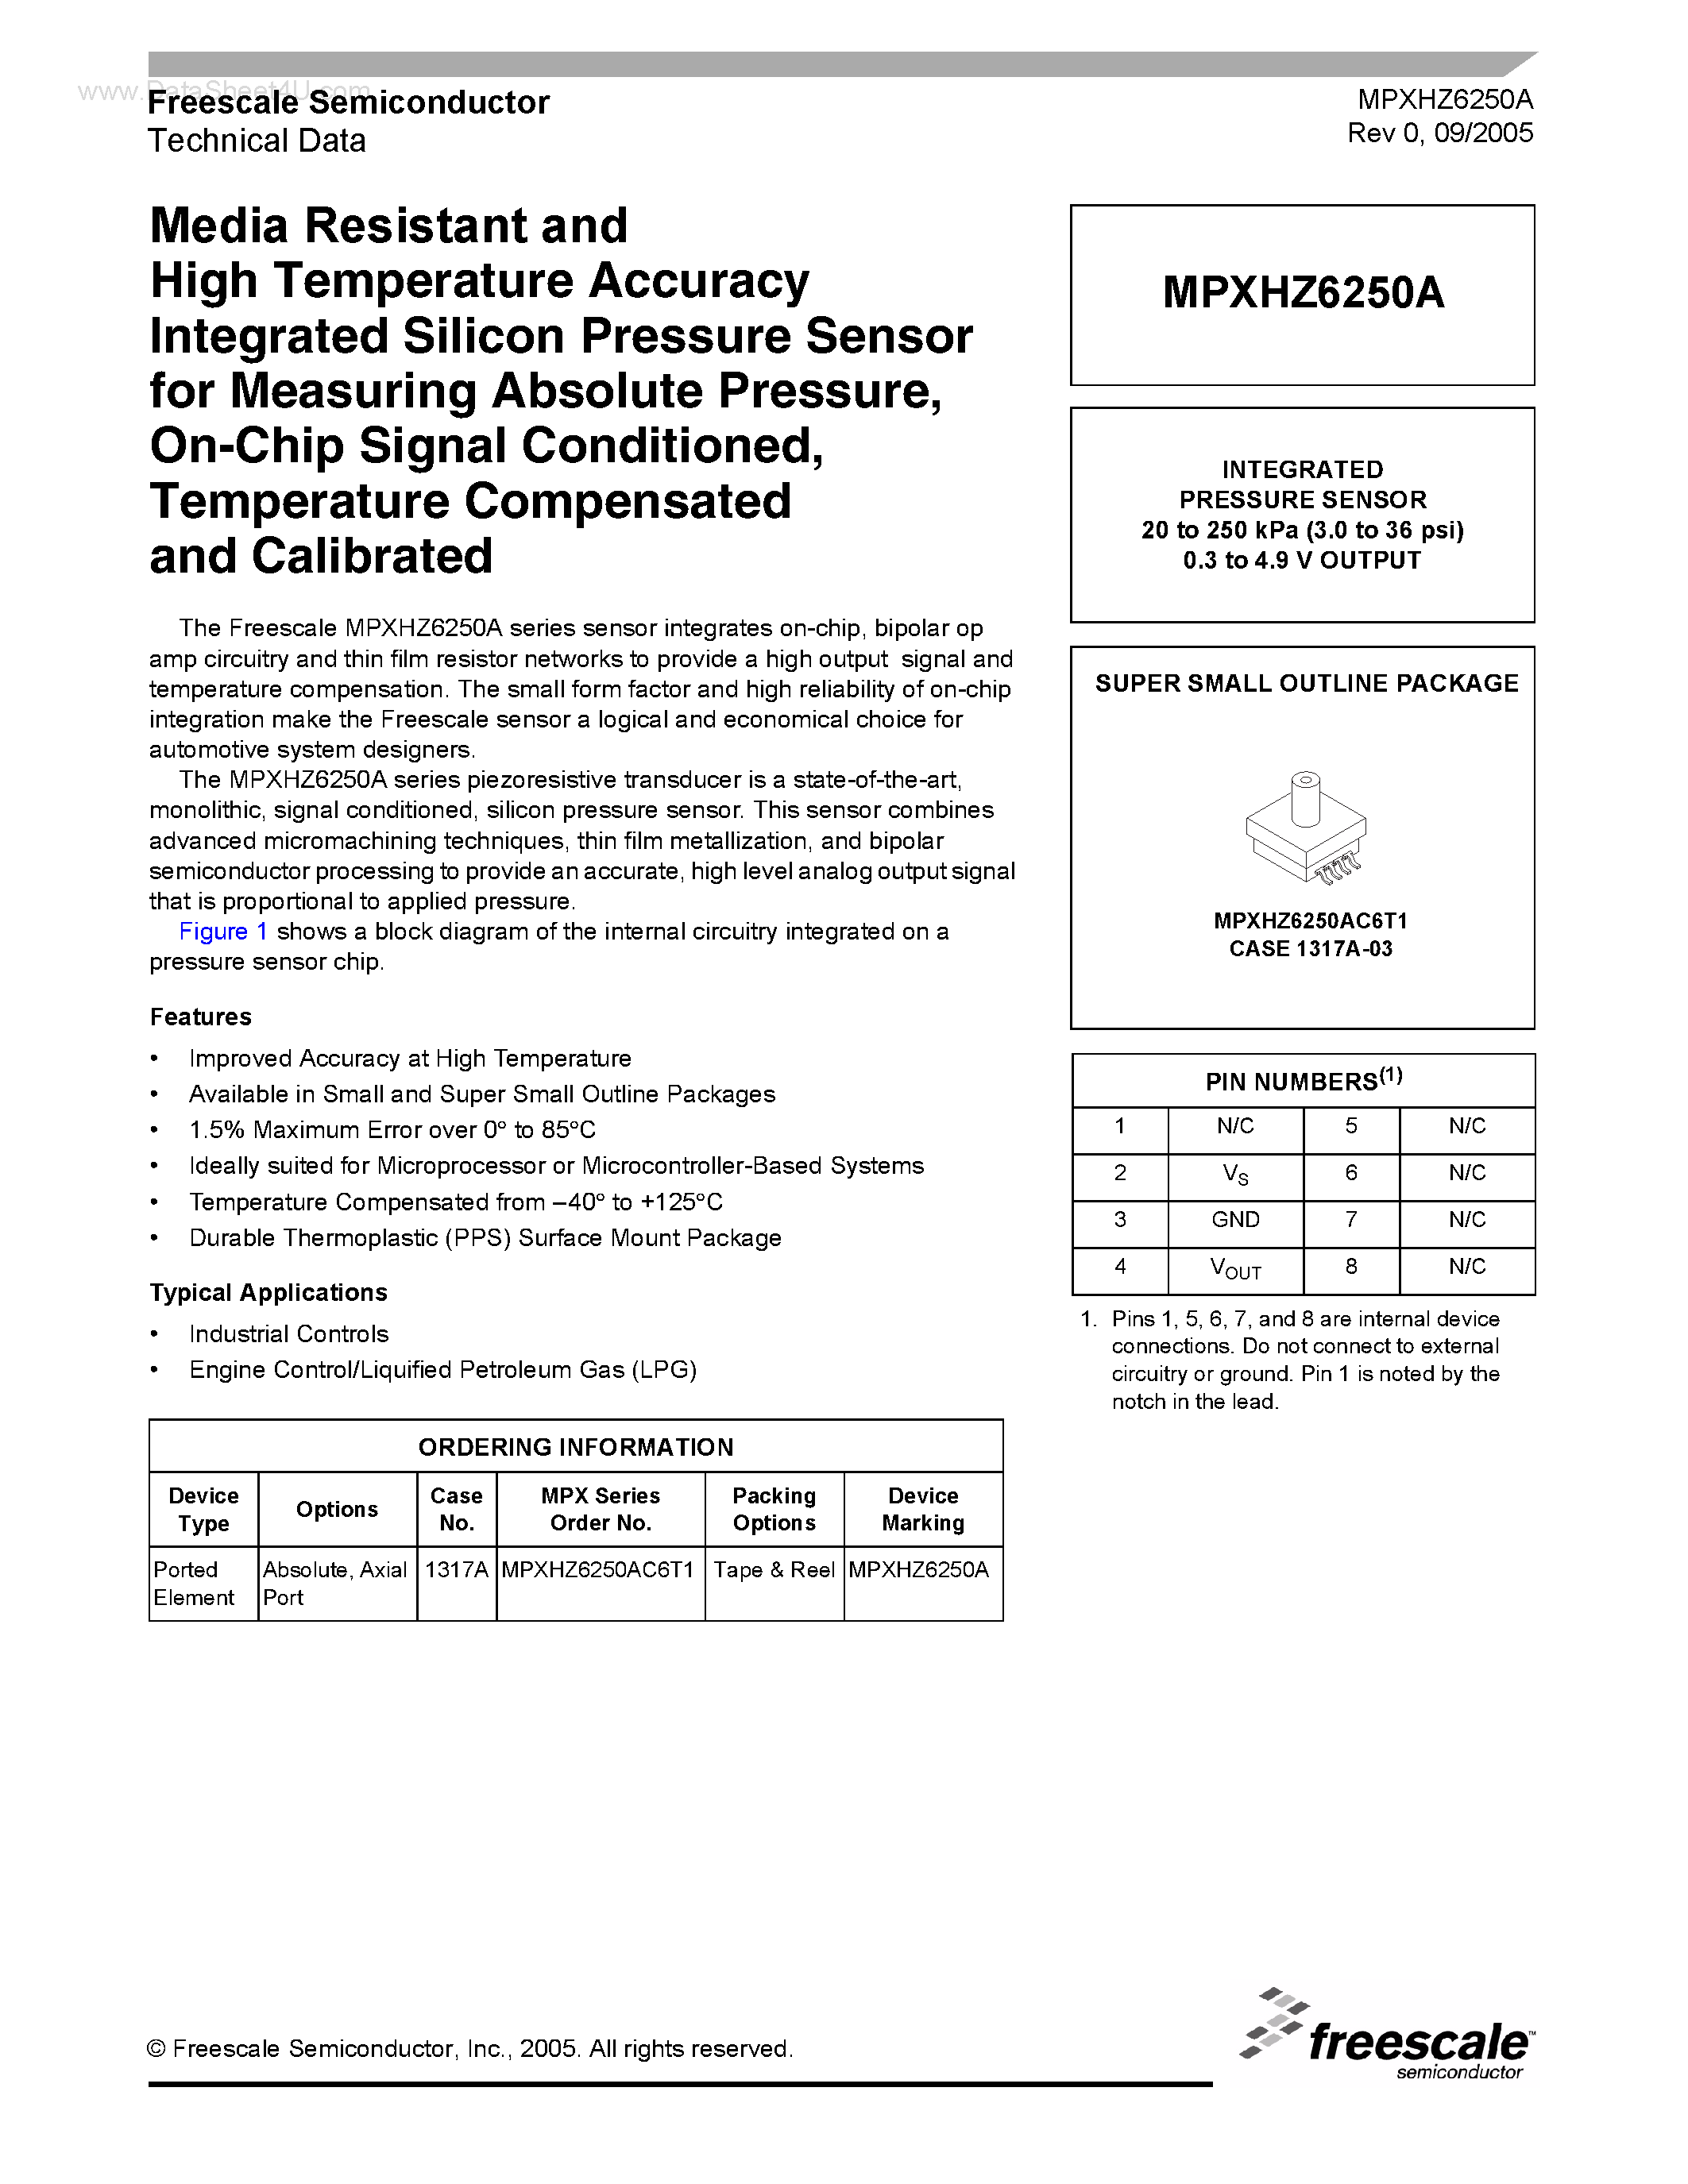 Datasheet MPXHZ6250A - Media Resistant and High Temperature Accuracy Integrated Silicon Pressure Sensor page 1